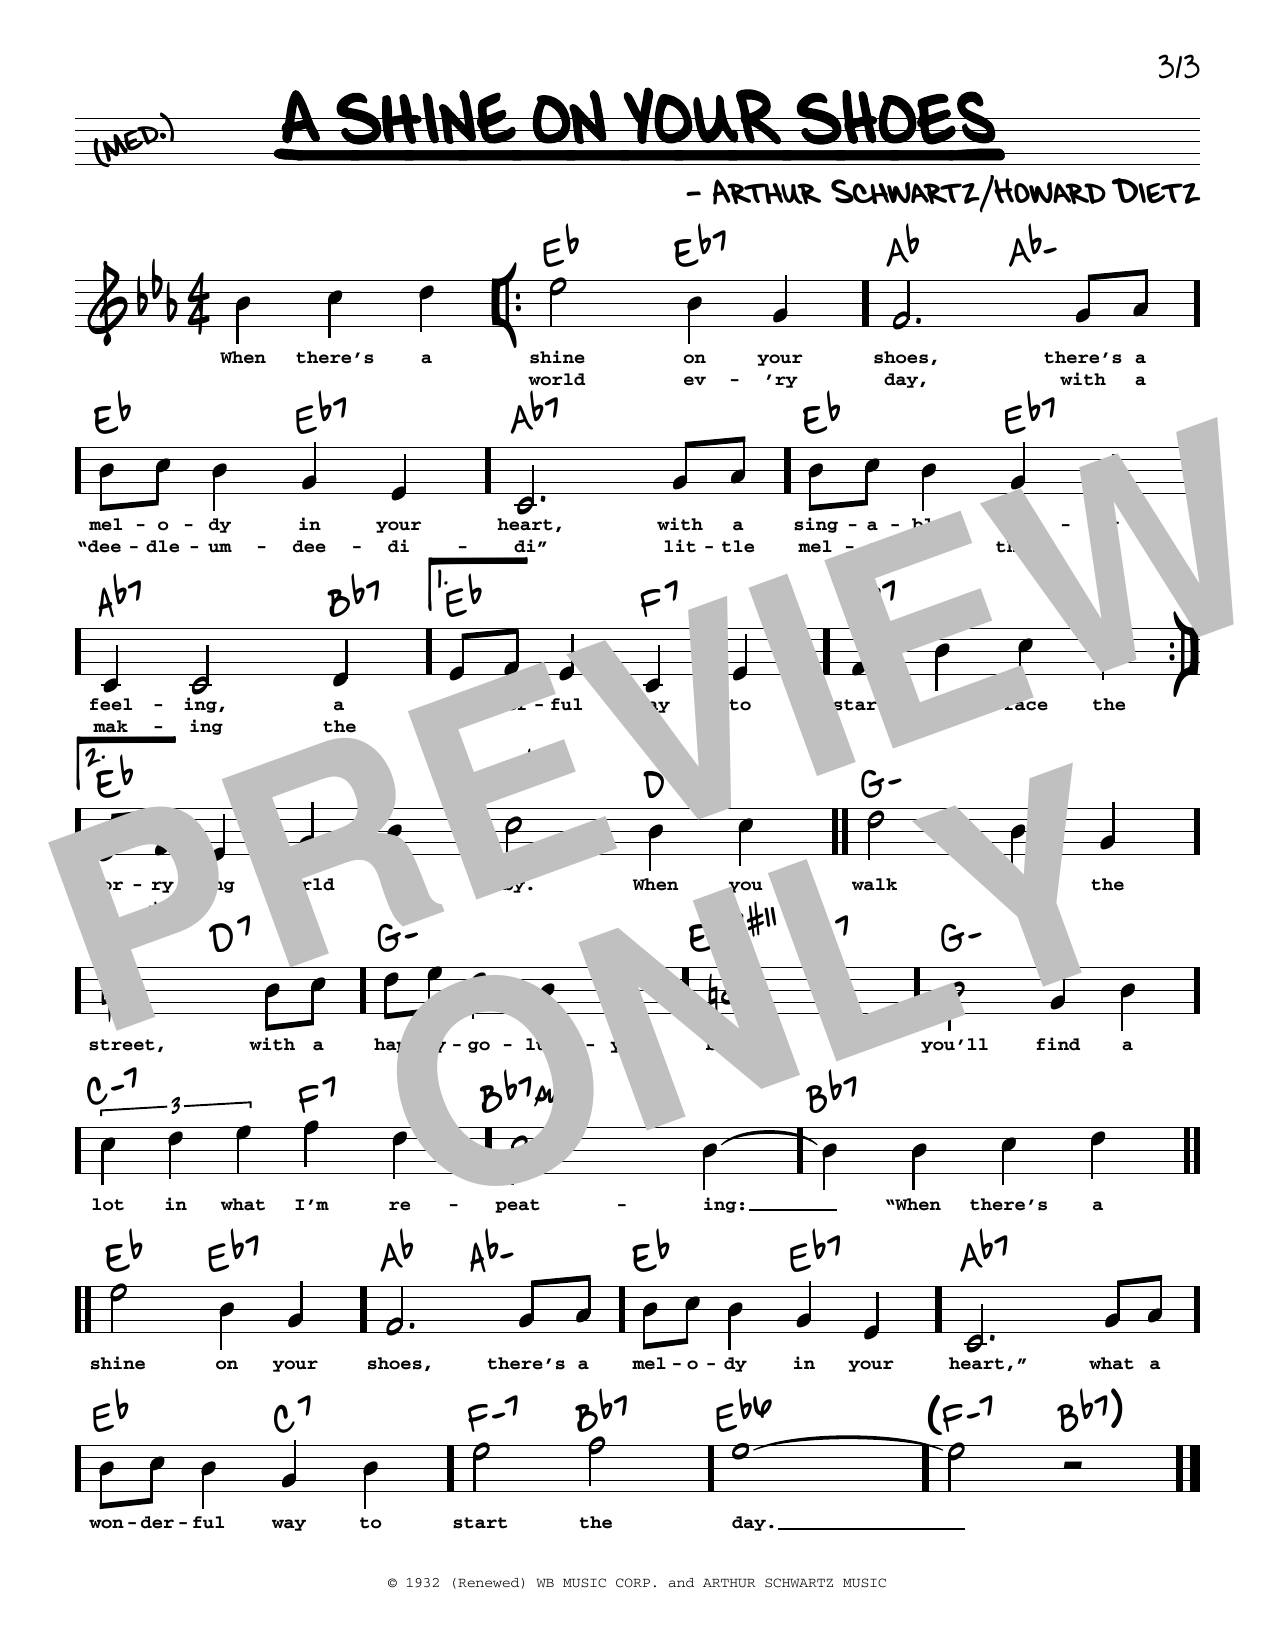 Download Howard Dietz and Arthur Schwartz A Shine On Your Shoes (High Voice) Sheet Music